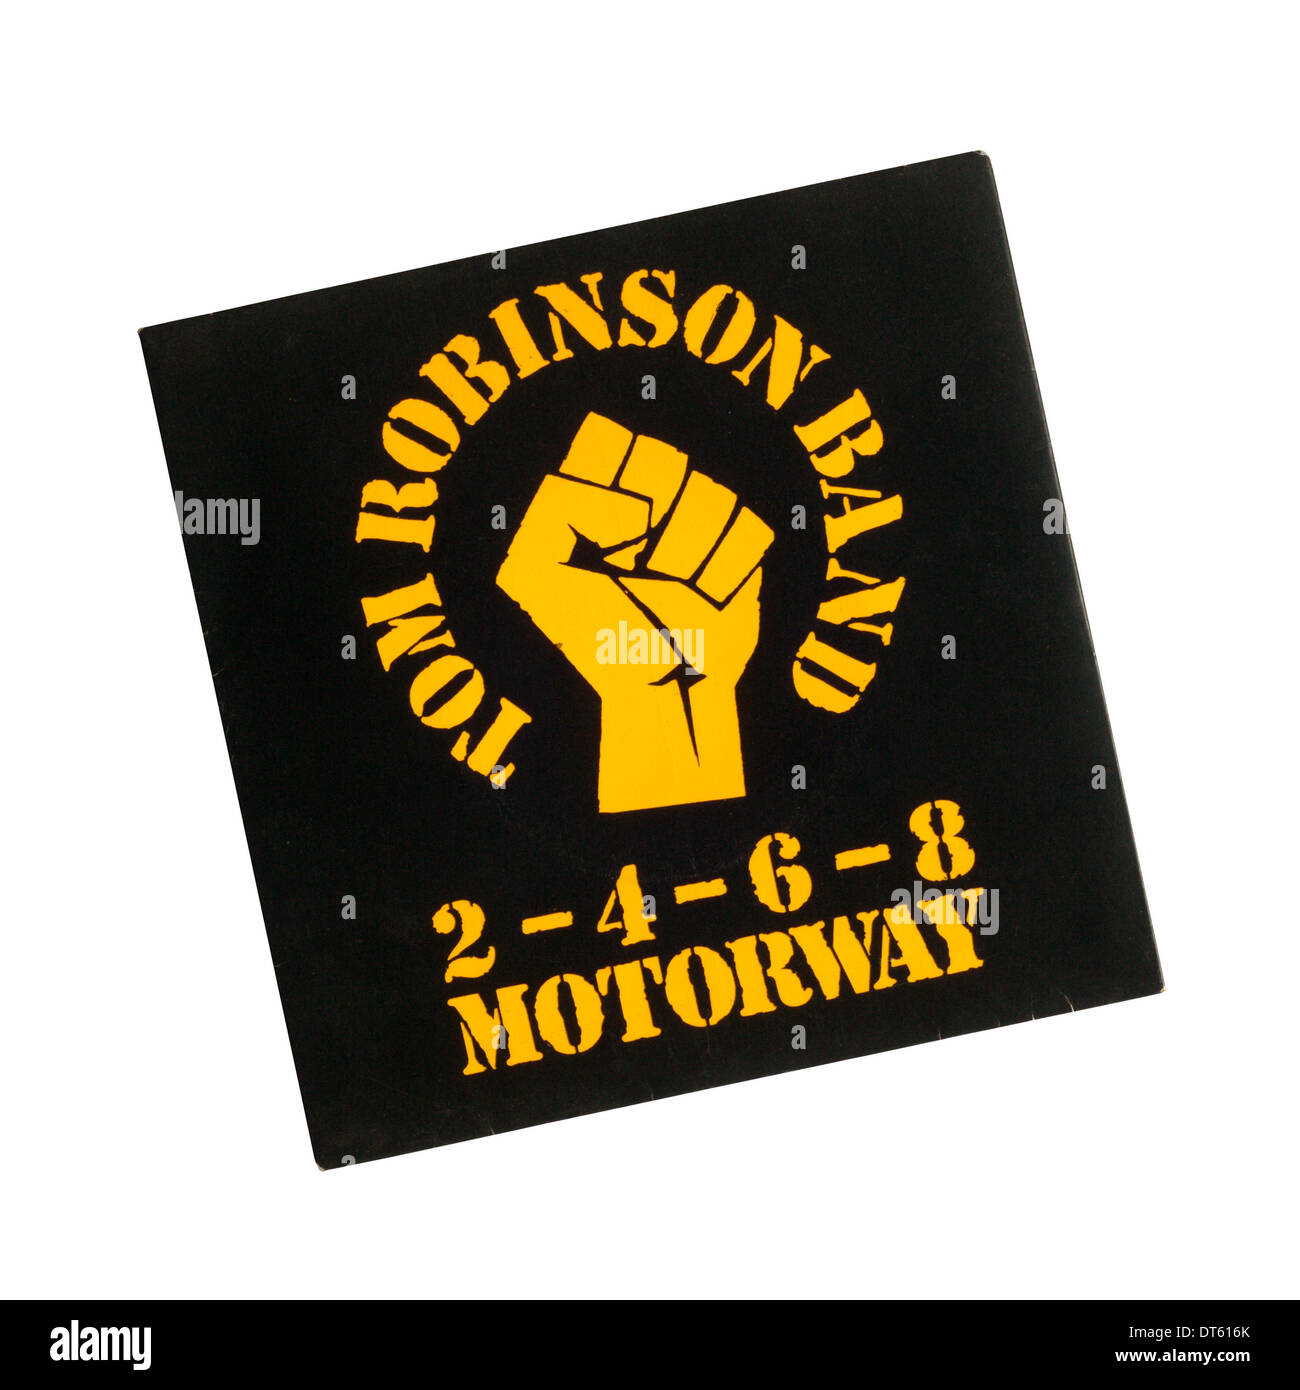 2-4-6-8 Motorway was a single by British punk rock / New Wave group Tom Robinson Band released in 1977. Stock Photo